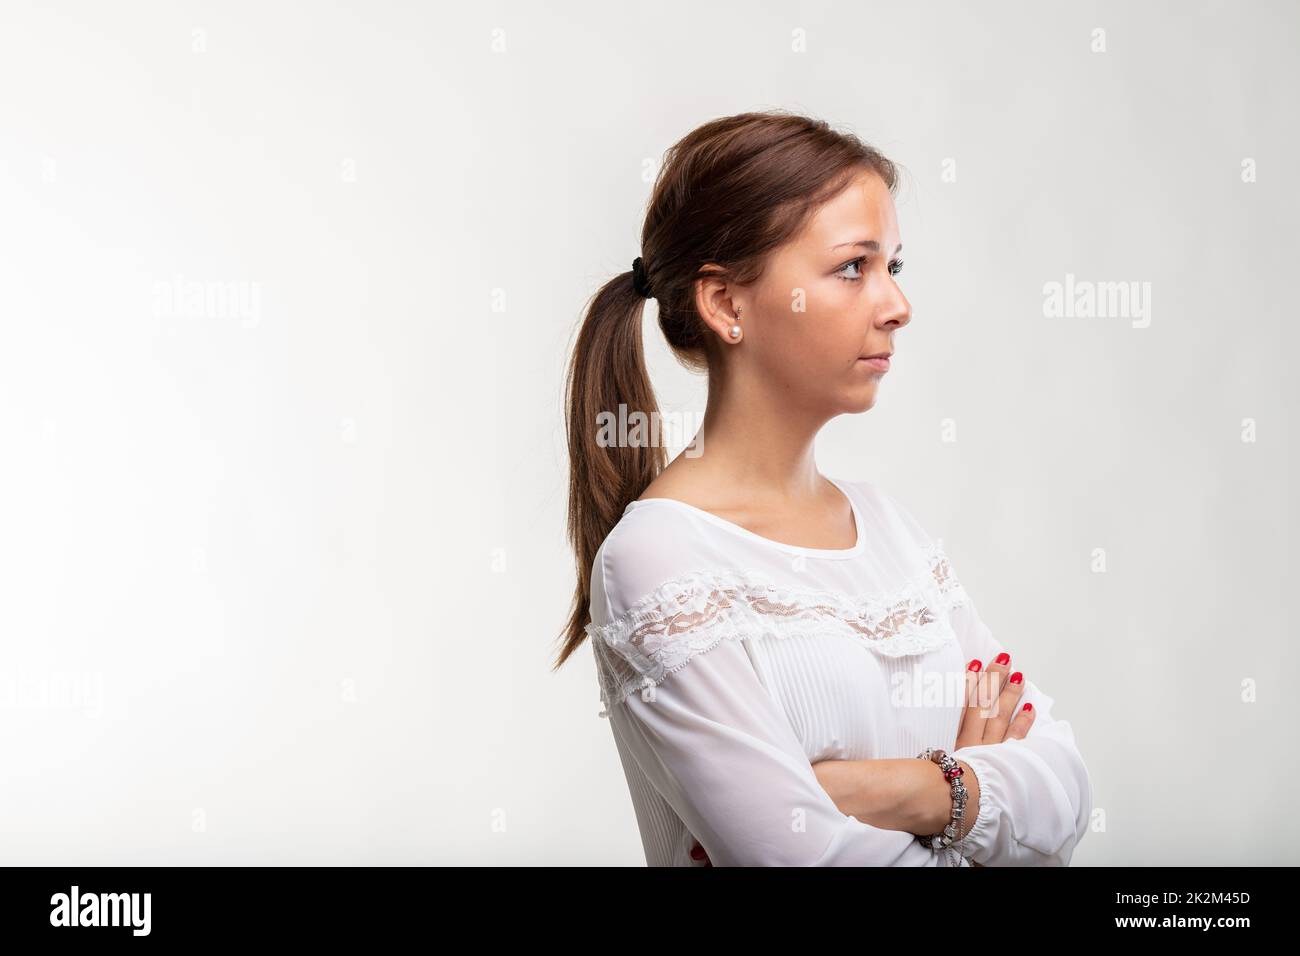 Self-assured calm young woman standing with folded arms Stock Photo